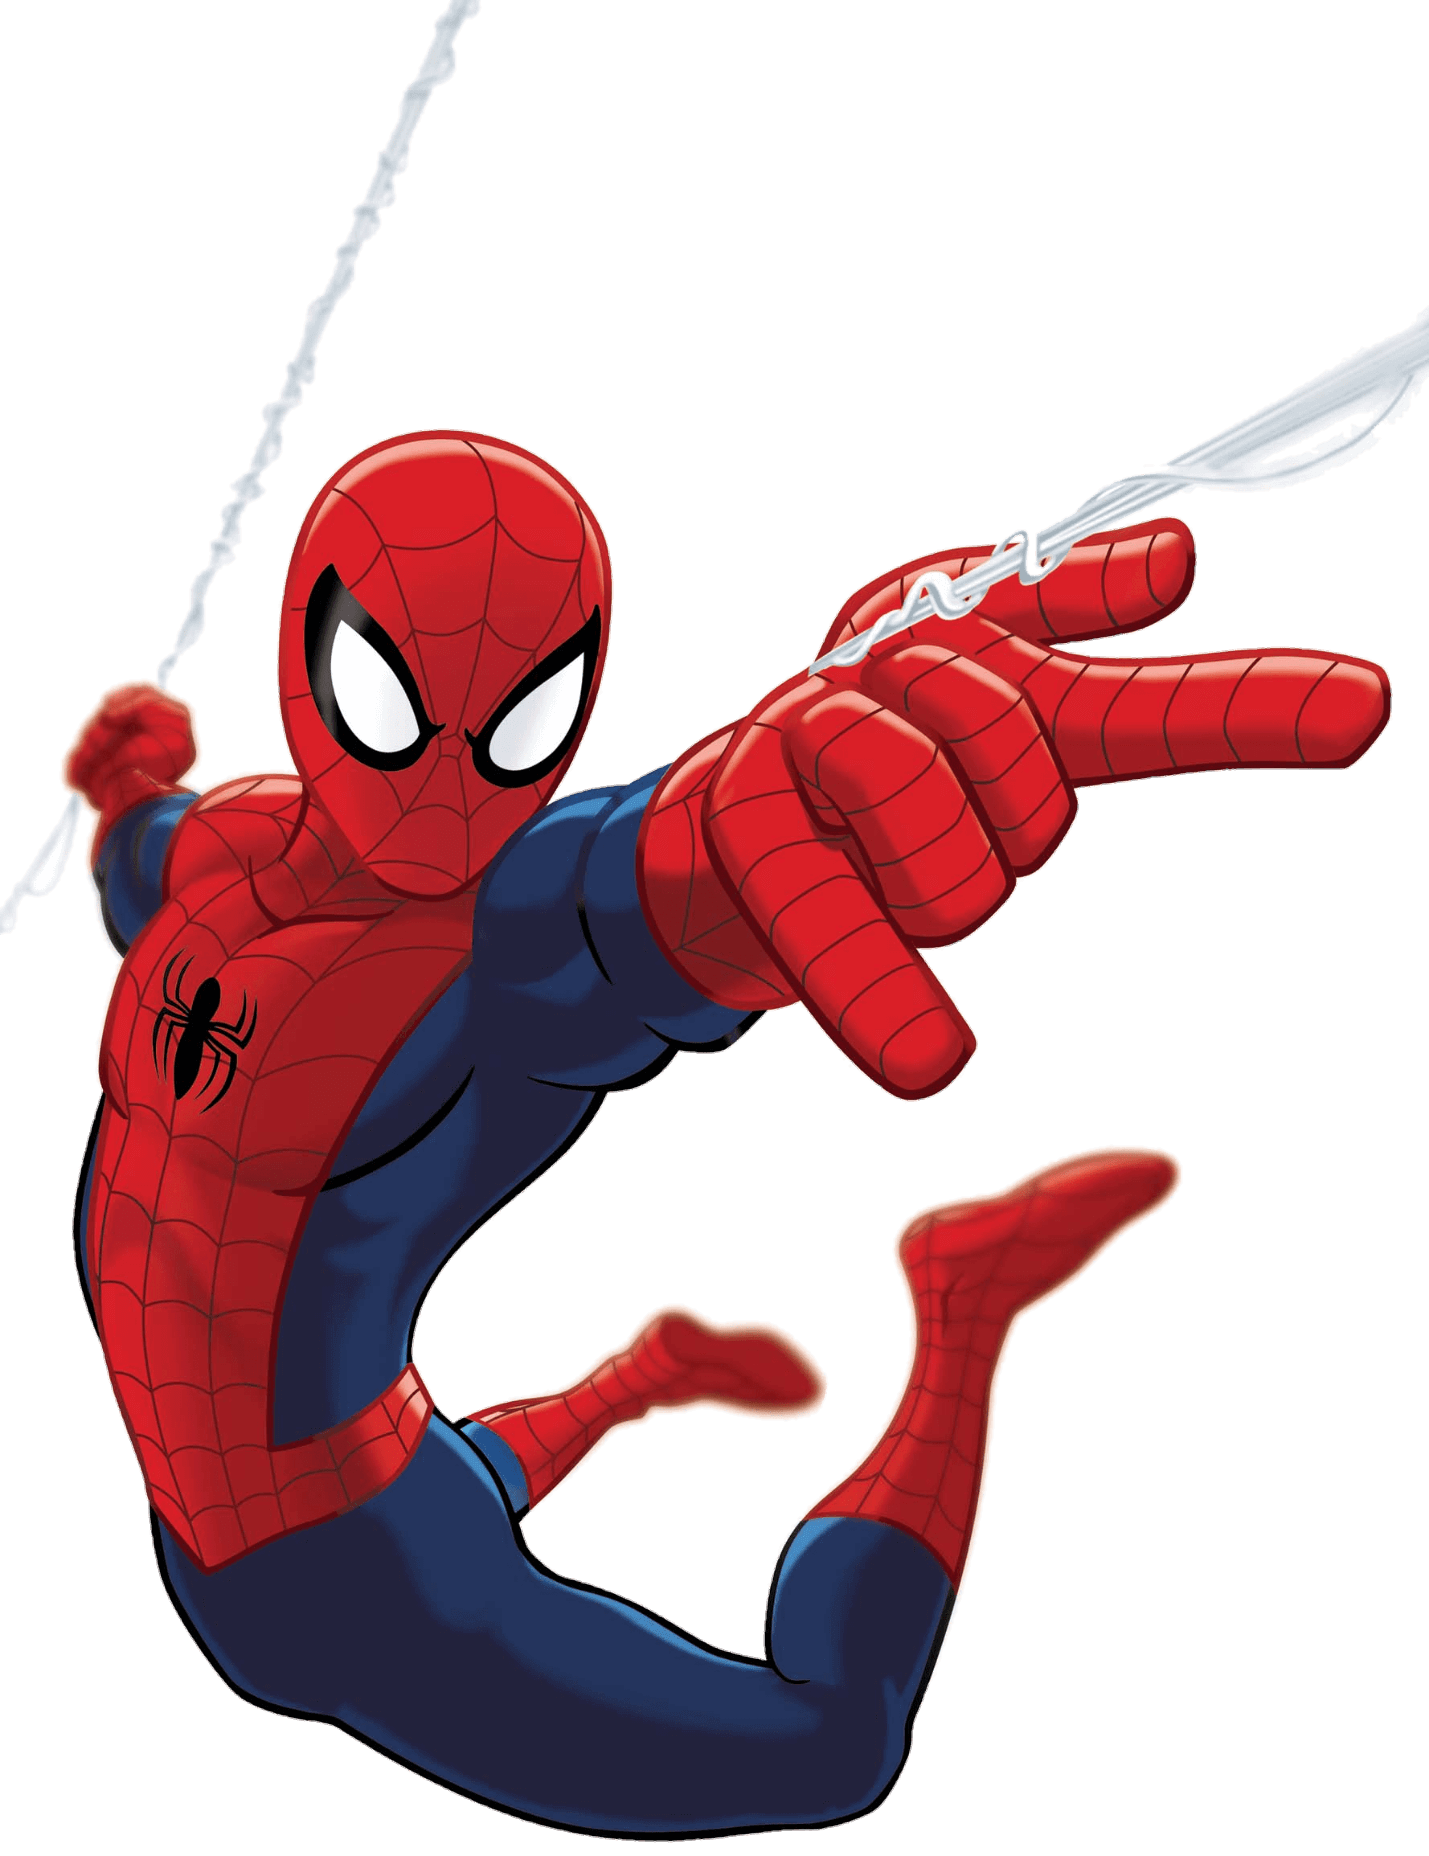 spider-man-png-from-pngfre-47